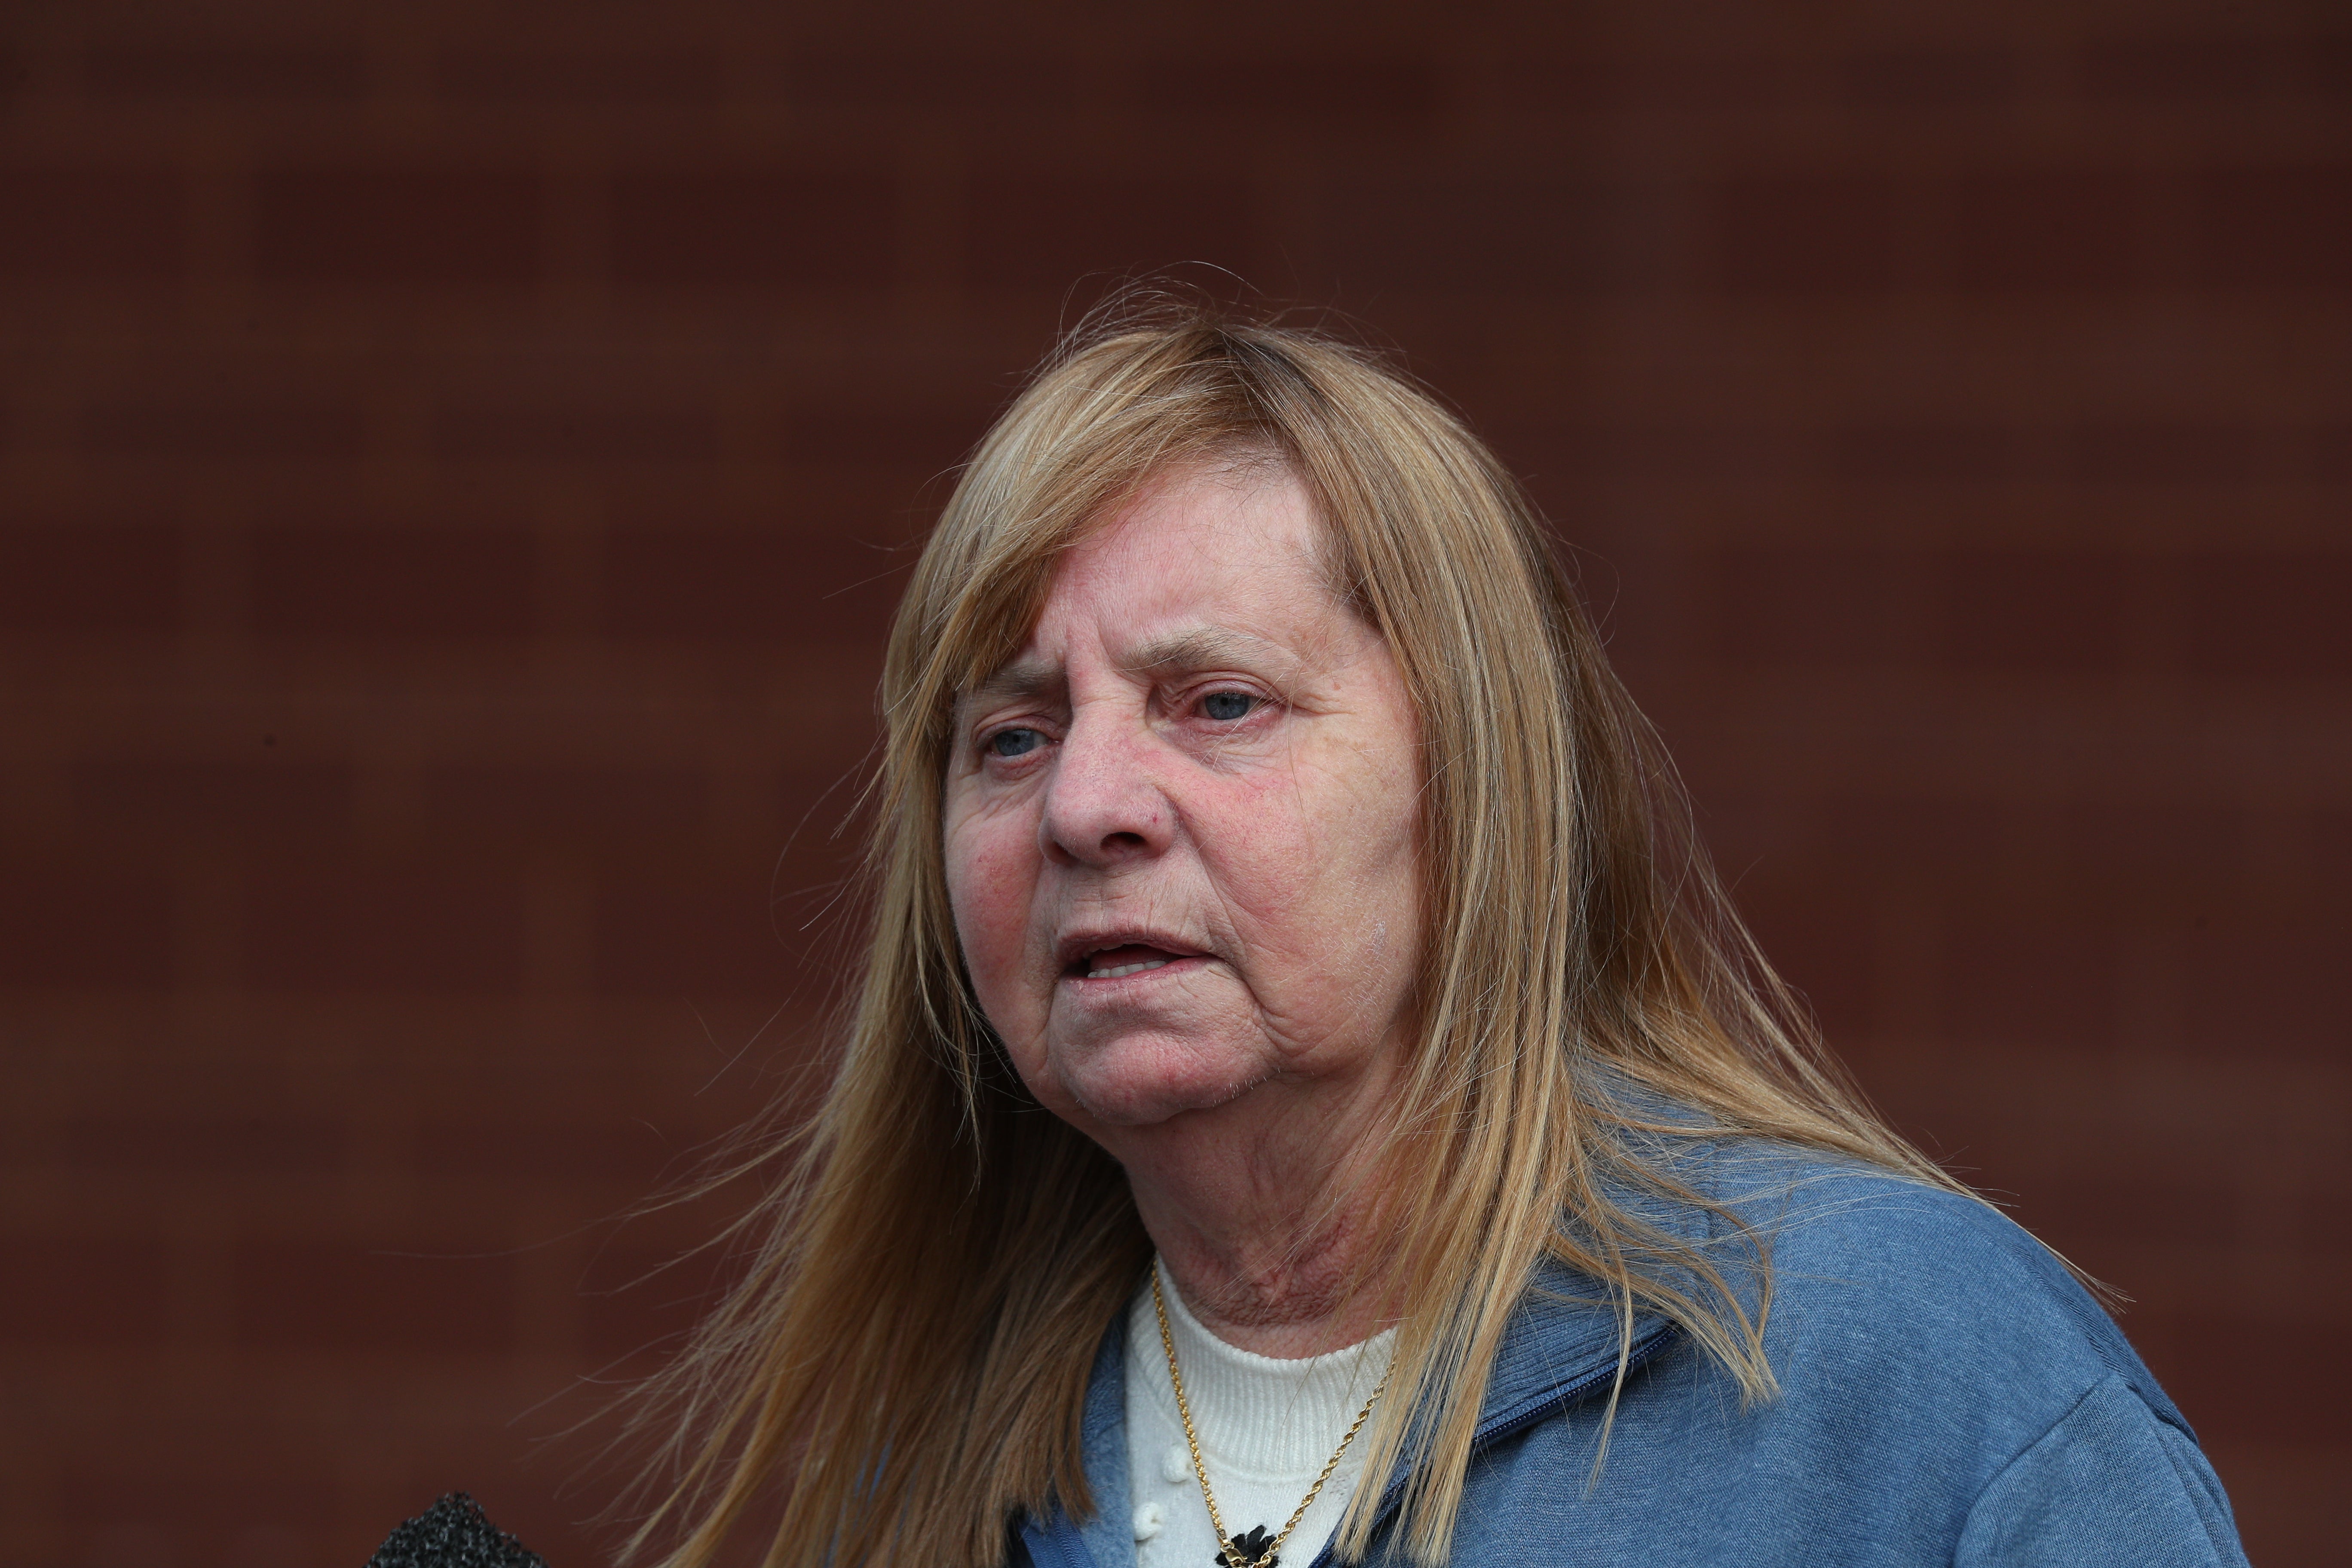 Hillsborough campaigner Margaret Aspinall cautiously welcomed the news on safe standing trials (Peter Byrne/PA)